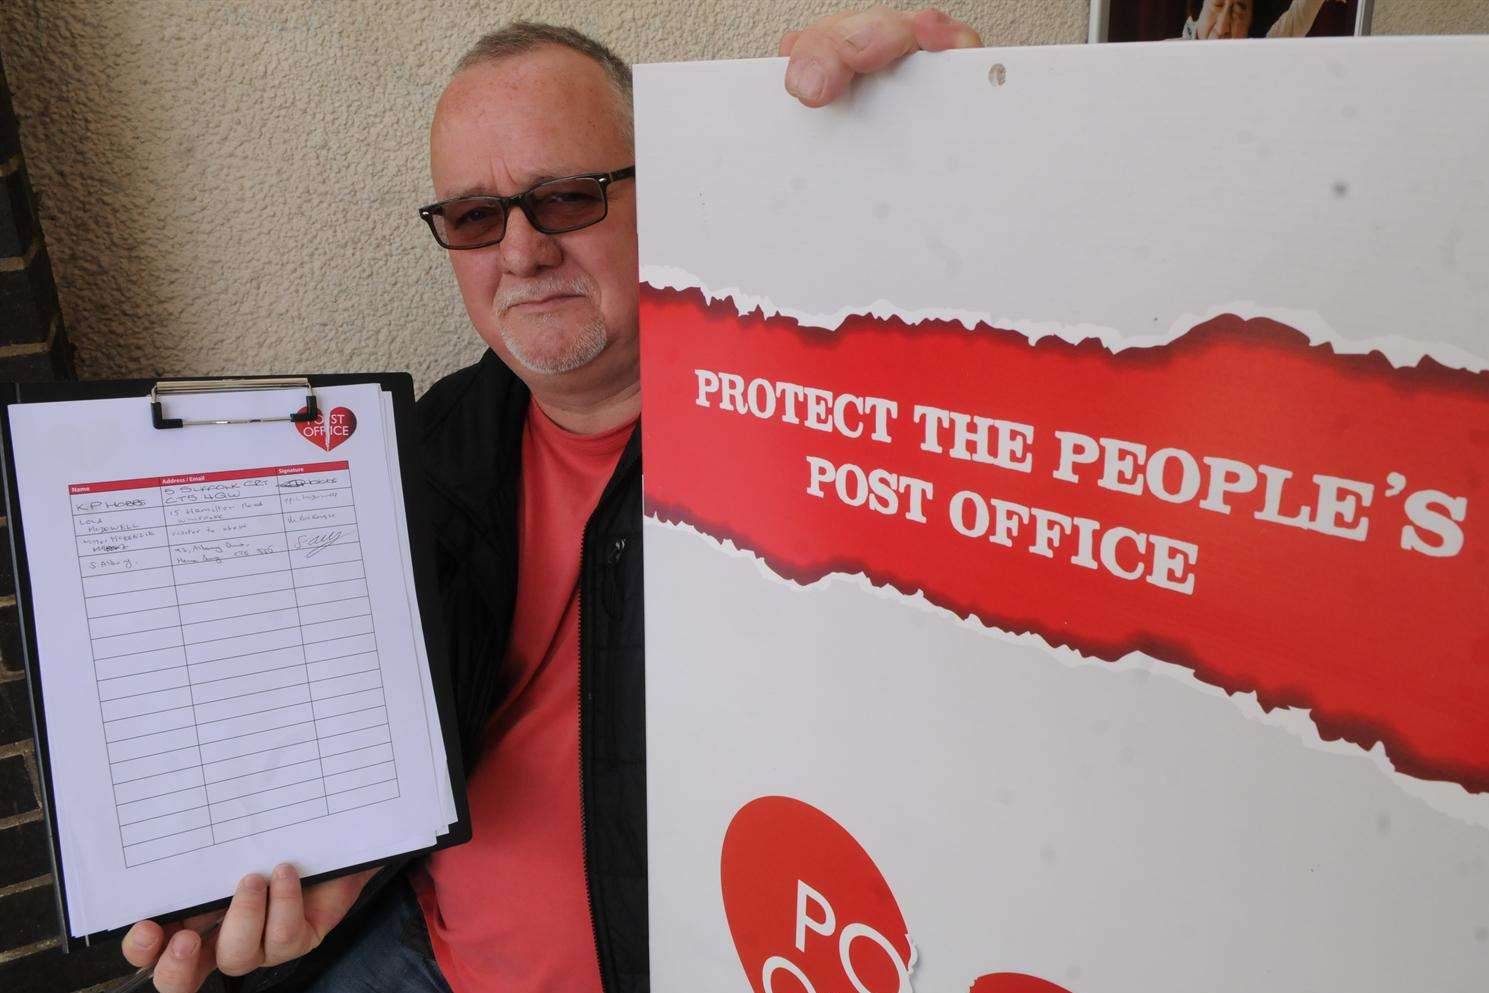 Mole Meade from the Communication Workers Union (CWU) asks people to join the campaign to save Gladstone Road post office